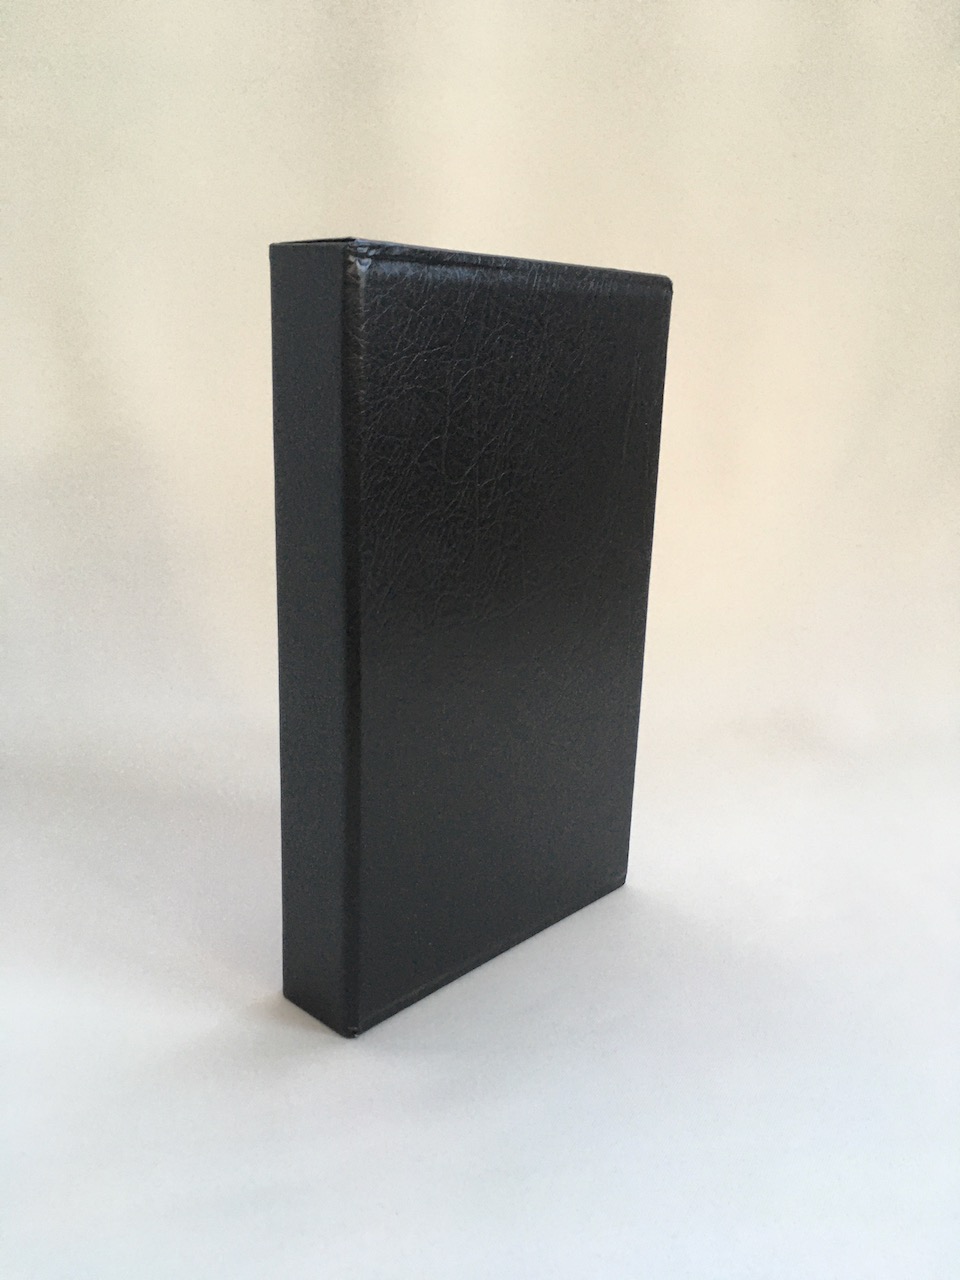 
Black Limited De Luxe edition of the Silmarillion 2002 6